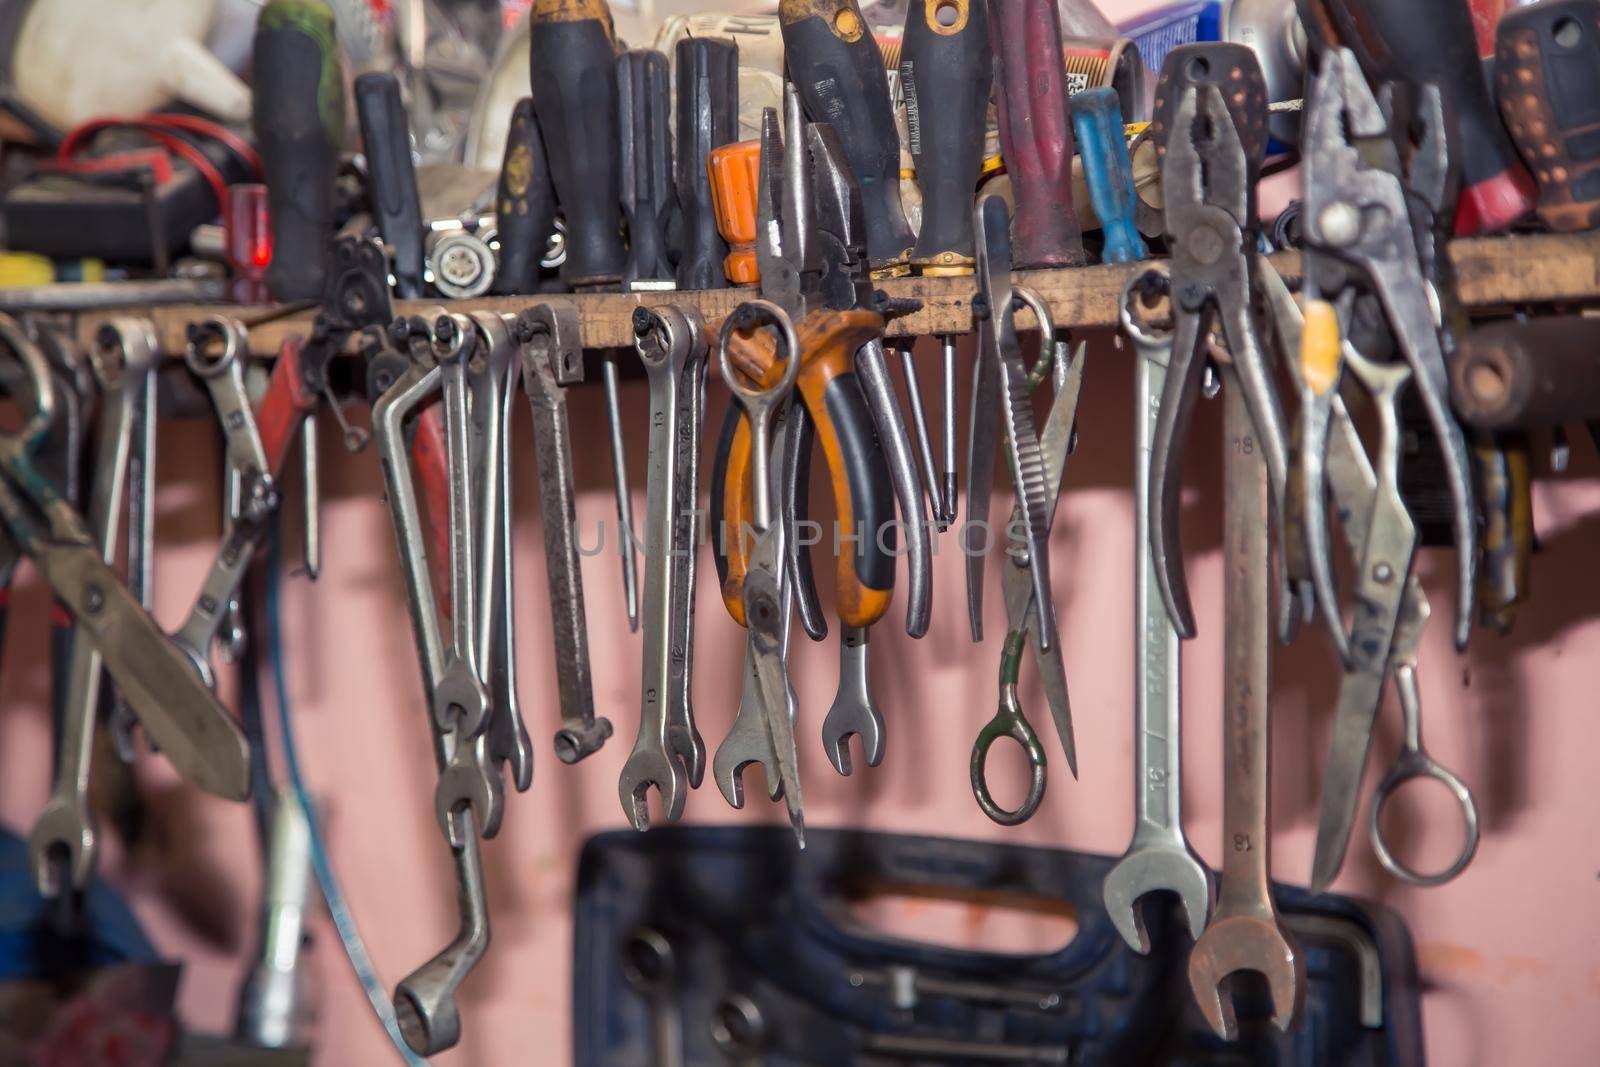 A set of wrenches, screwdrivers, pliers hang on a shelf in the workshop. In the garage are tools for repairing broken vehicle parts. Small business concept, car repair and maintenance service.